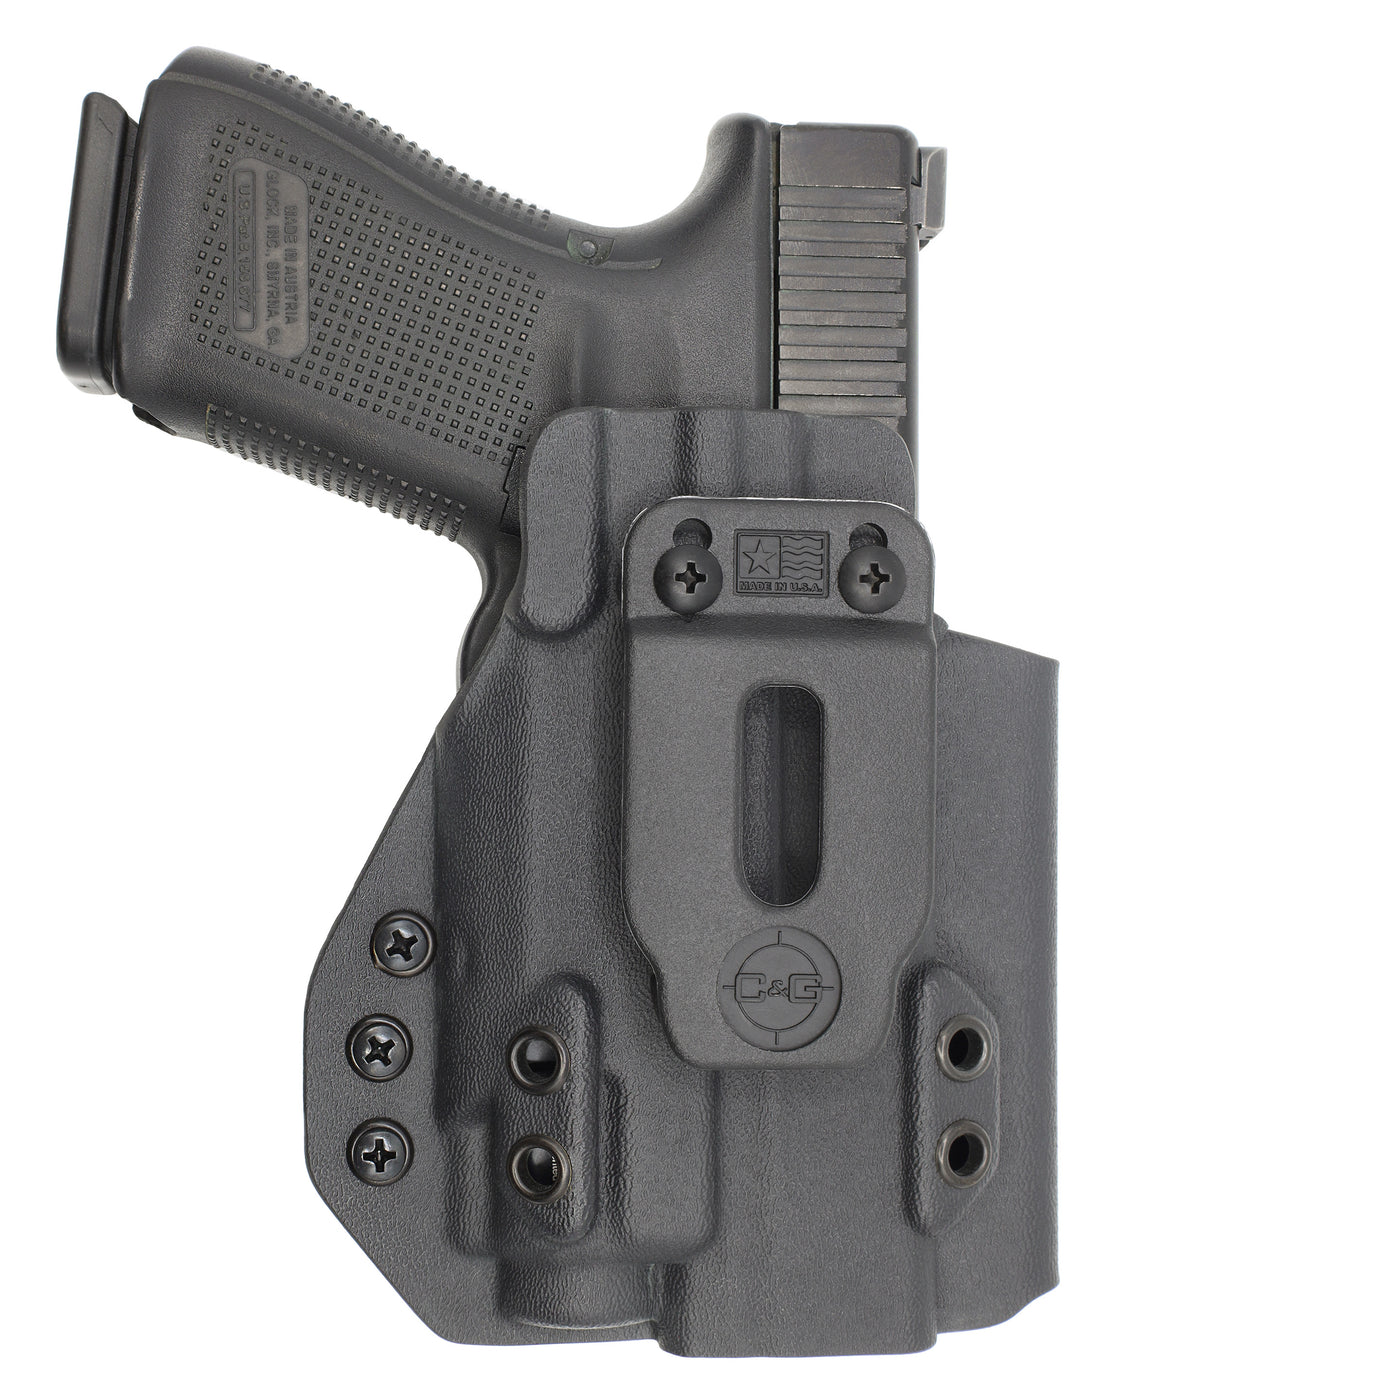 C&G Holsters quickship IWB Tactical Glock 29/30 streamlight TLR8 holstered